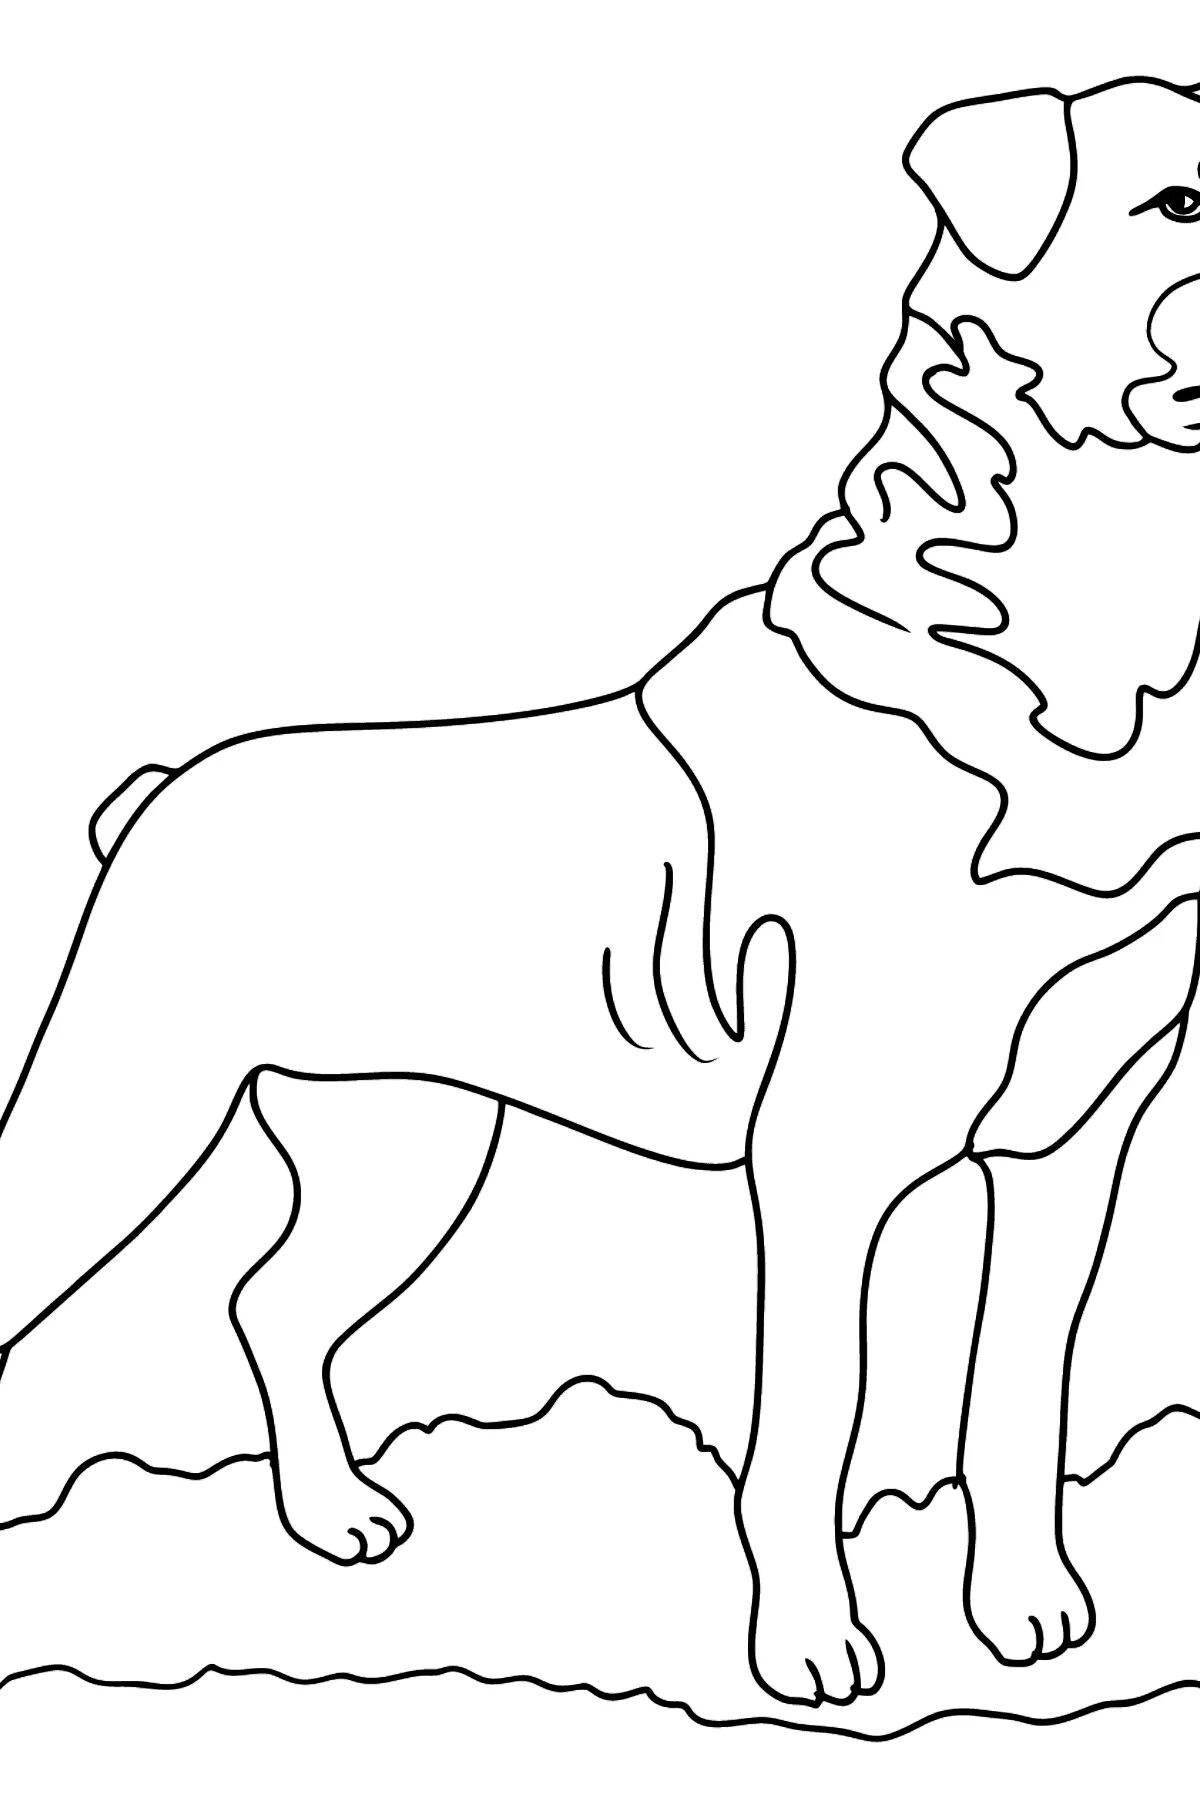 Coloring page graceful rottweiler